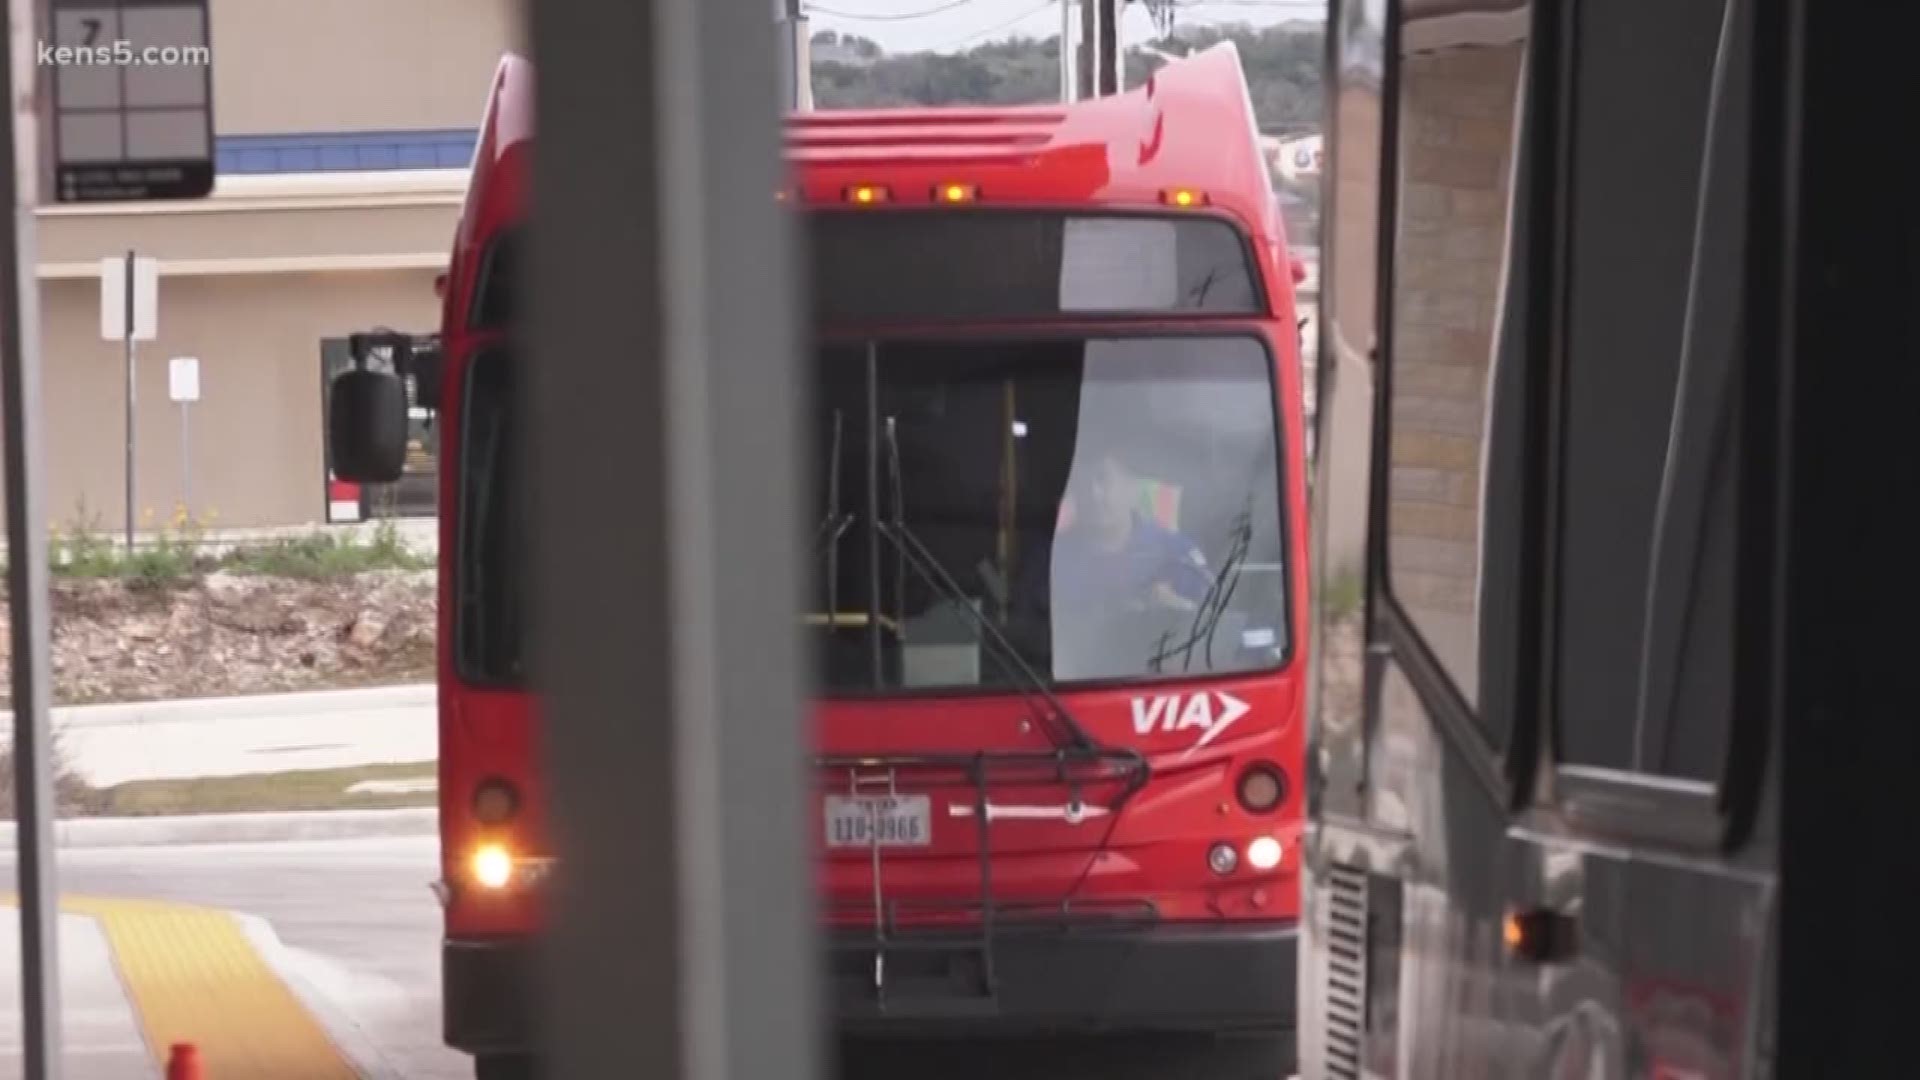 Thanks to a new partnership with VIA Metropolitan Transit, University of Texas at San Antonio students no longer have to worry about transportation. Starting this fall, VIA will offer Roadrunners free bus passes to transport them between campuses.